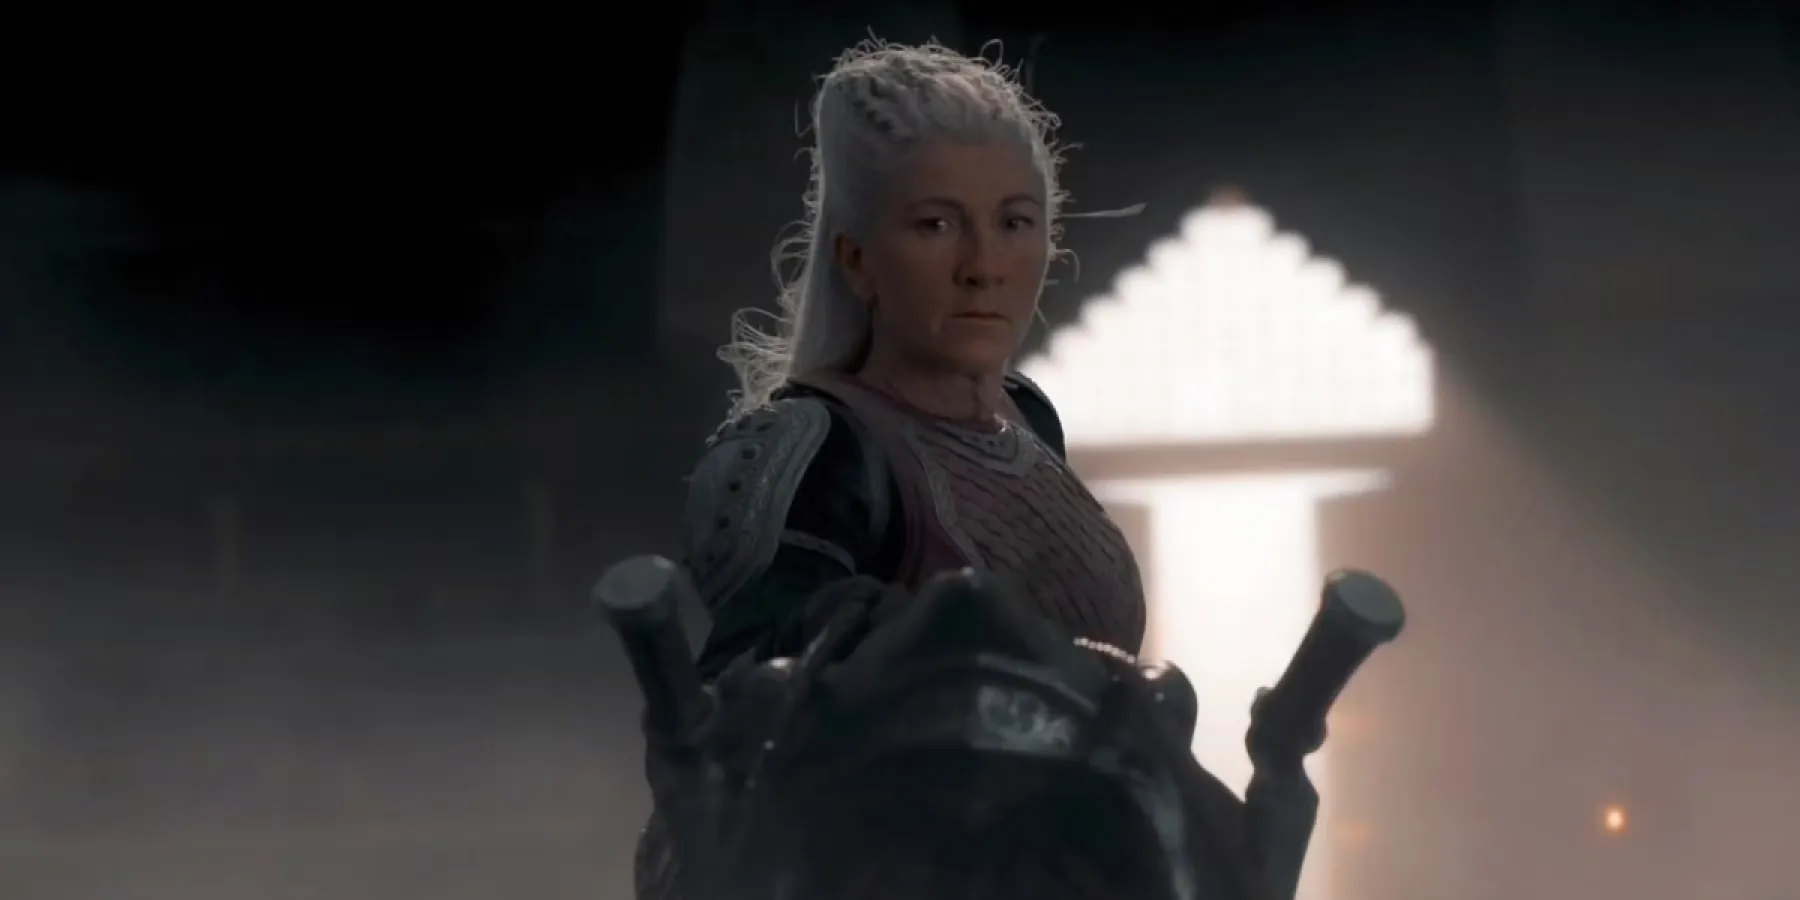 A picture of Princess Rhaenys Targaryen, played by Eve Best, astride her dragon Meleys in Episode 9 of House of the Dragon